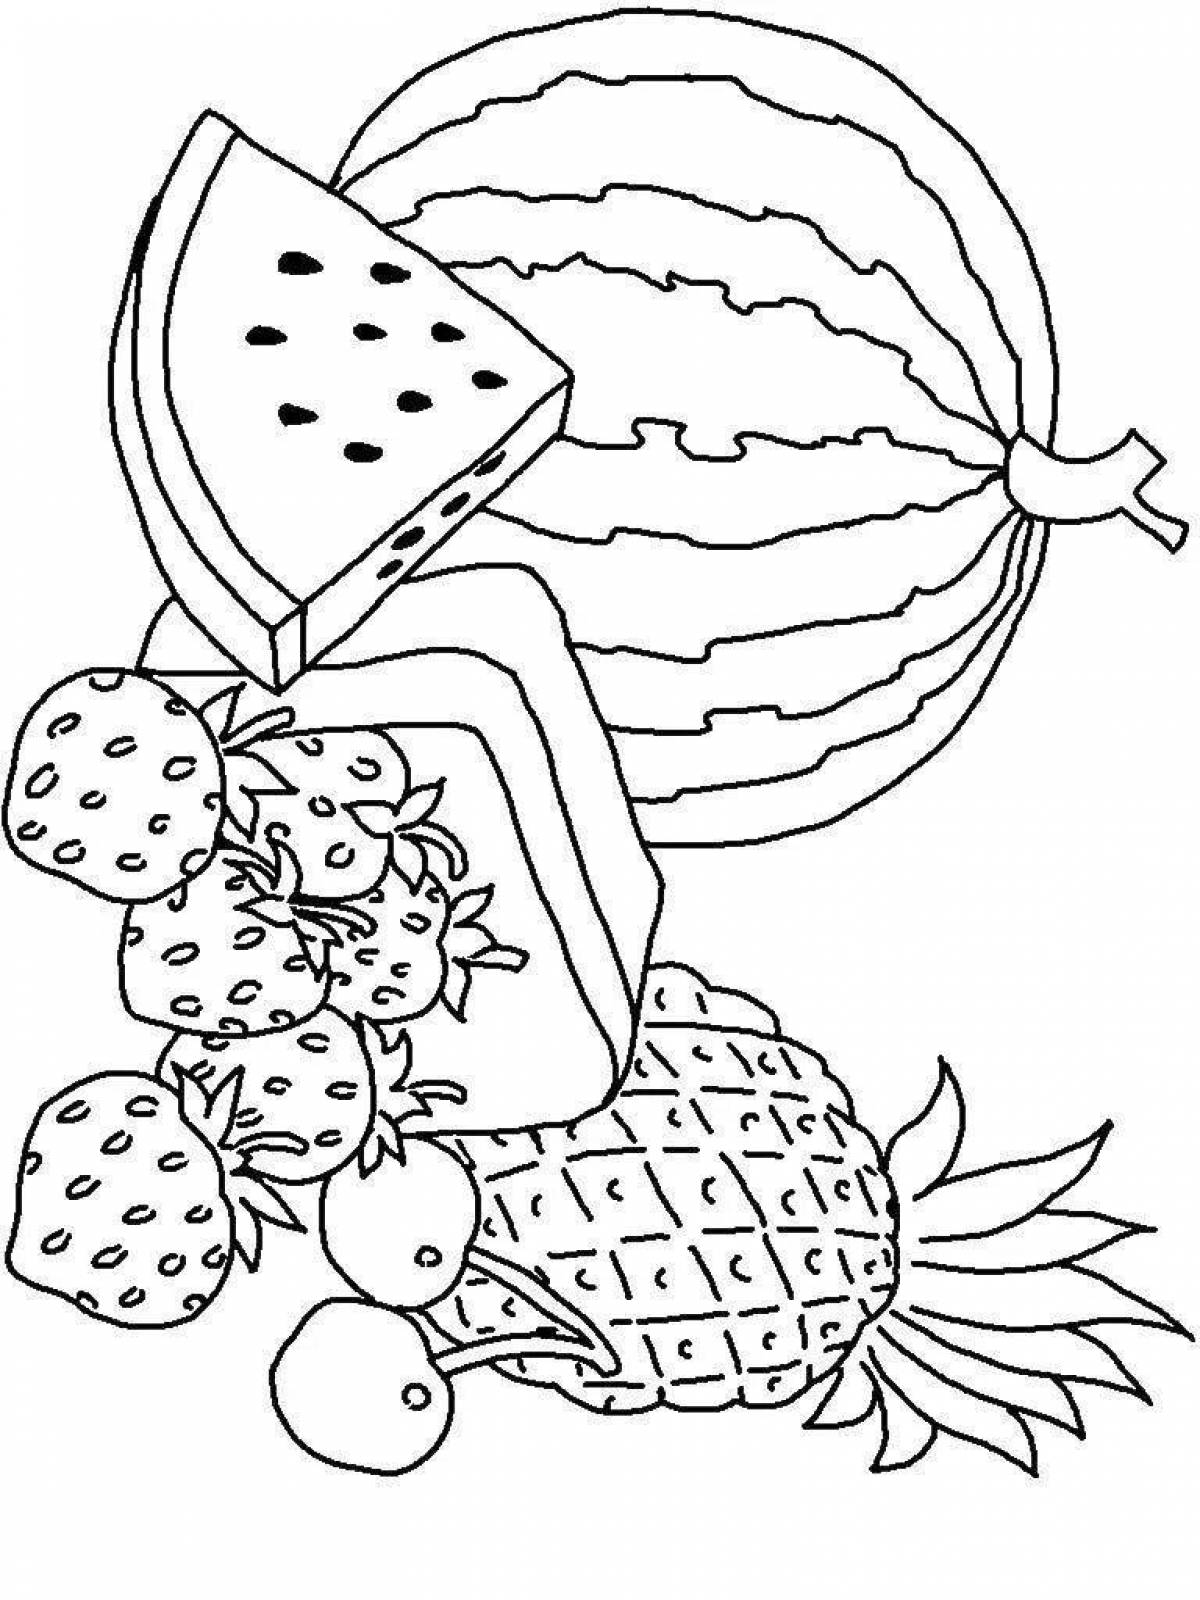 Cute fruit coloring book for 6-7 year olds